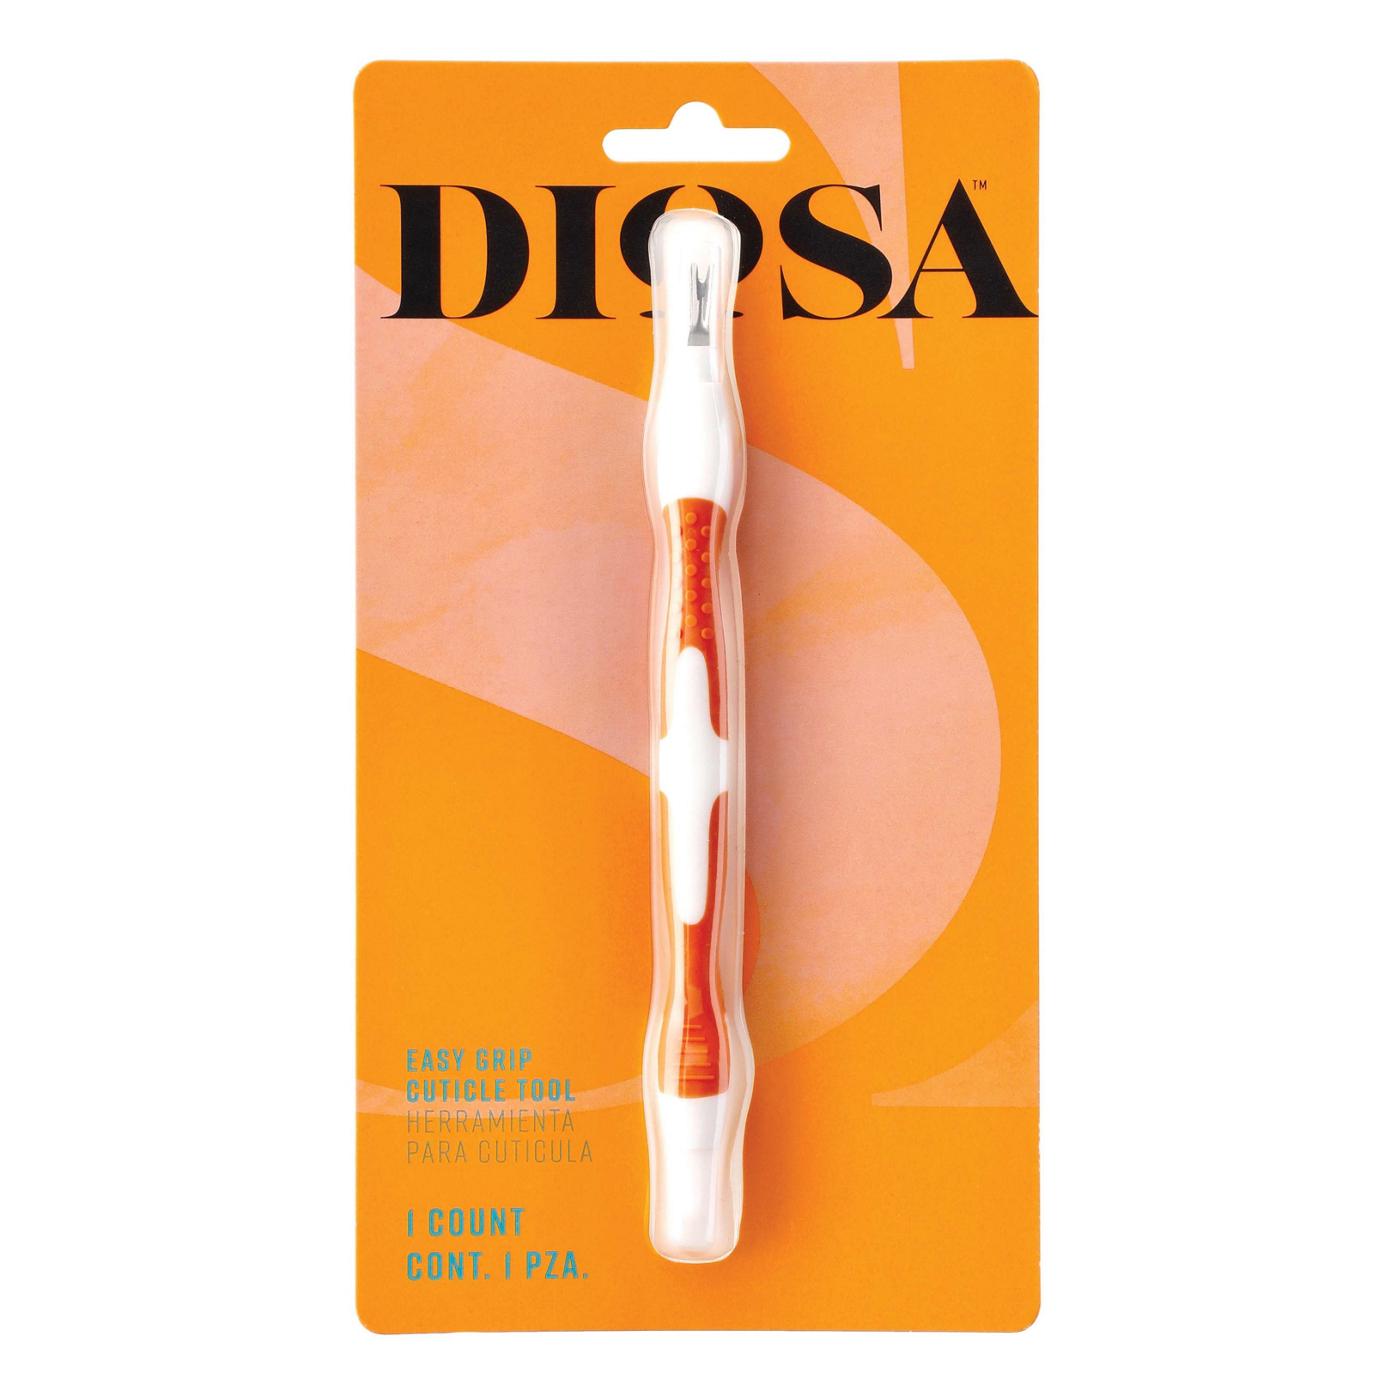 Diosa Easy Grip Cuticle Tool; image 1 of 4